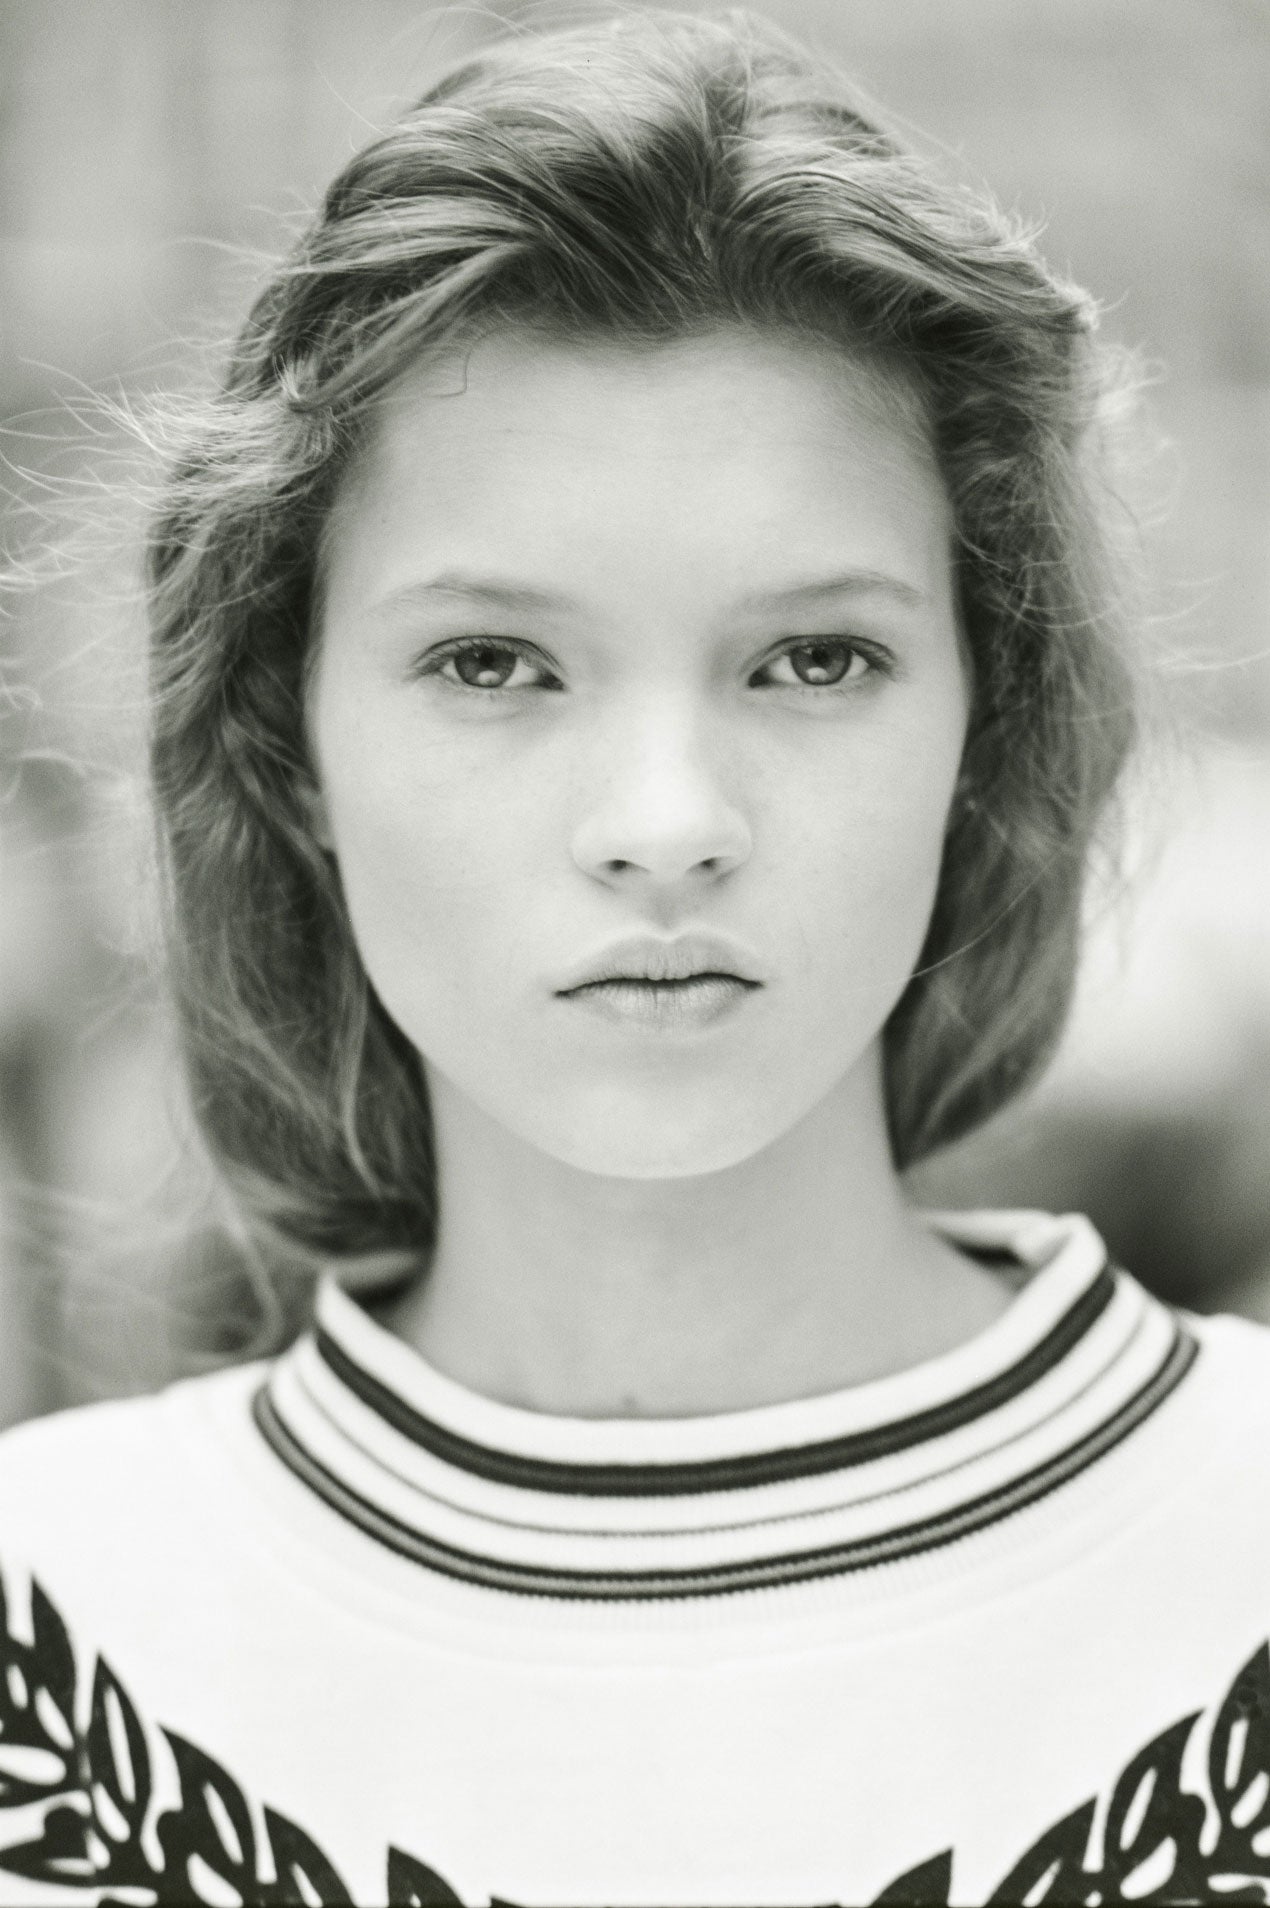 Kate Moss At 40 Her Most Iconic Looks The Independent The Independent